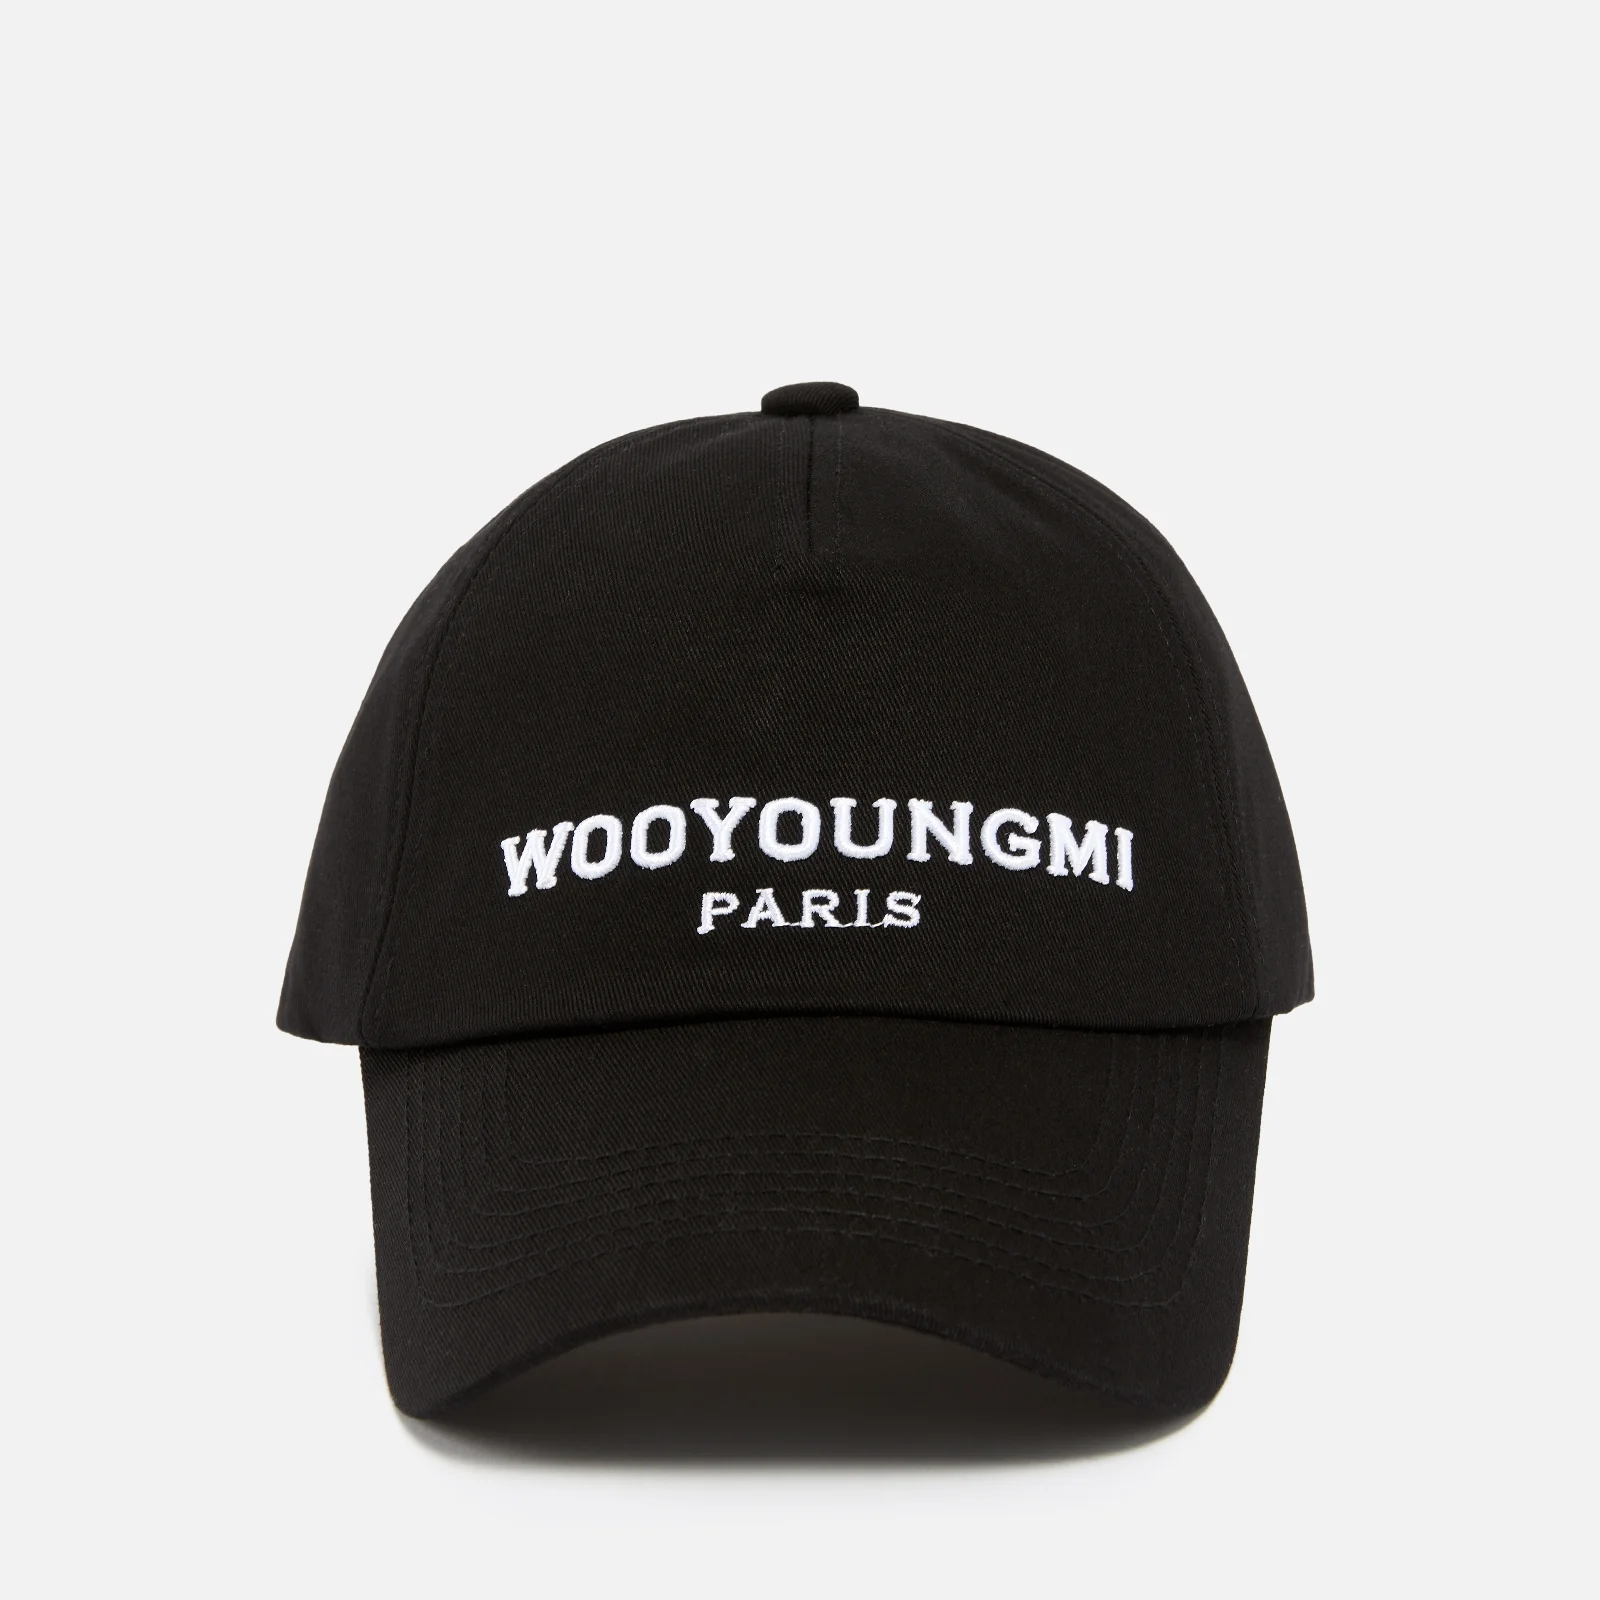 Wooyoungmi Paris Logo-Embroidered Cotton-Twill Baseball Cap Image 1